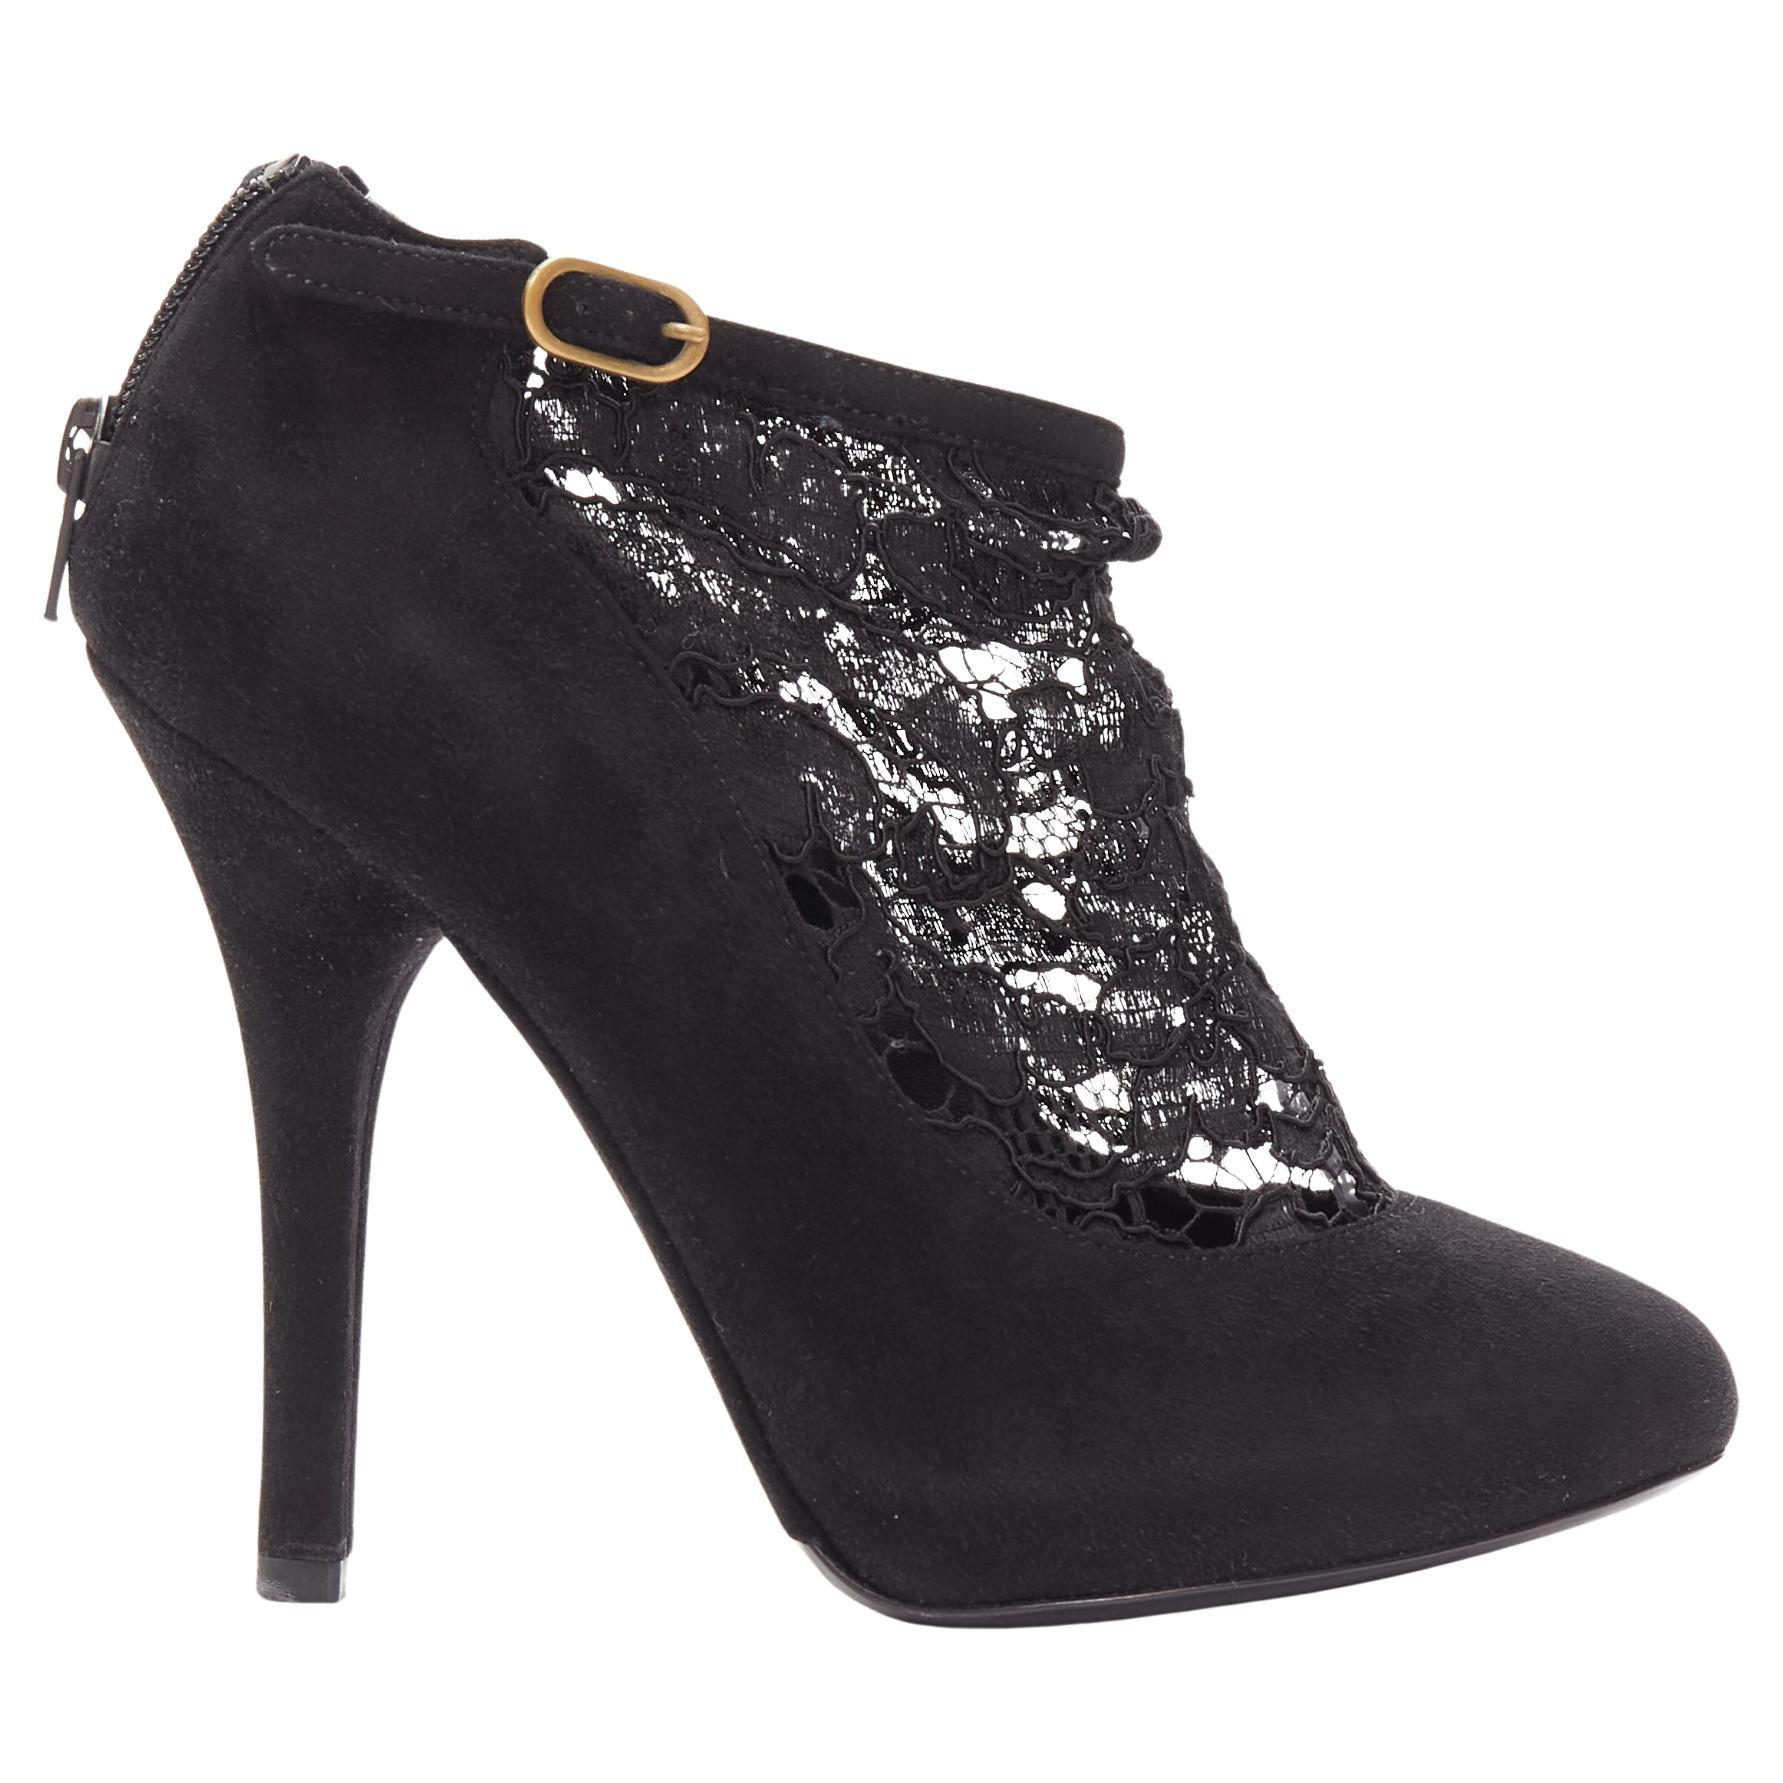 DOLCE GABBANA black suede floral lace ankle high heel ankle booties EU36 For Sale